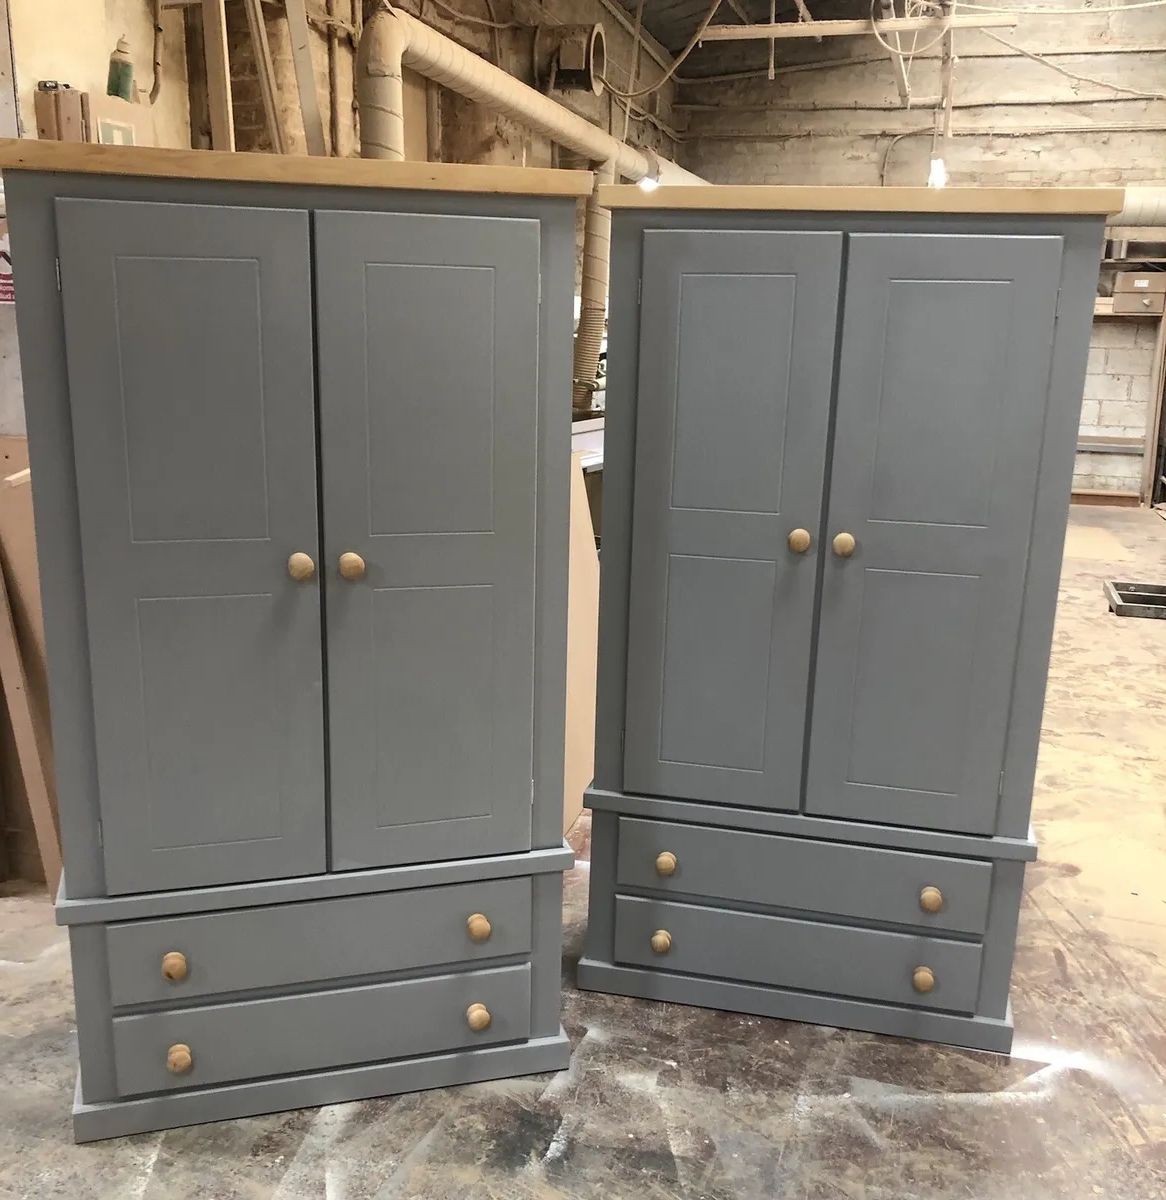 Handmade Aylesbury Grey Double Twin Wardrobes For Sale … | Ebay In Cheap Double Wardrobes (View 11 of 20)